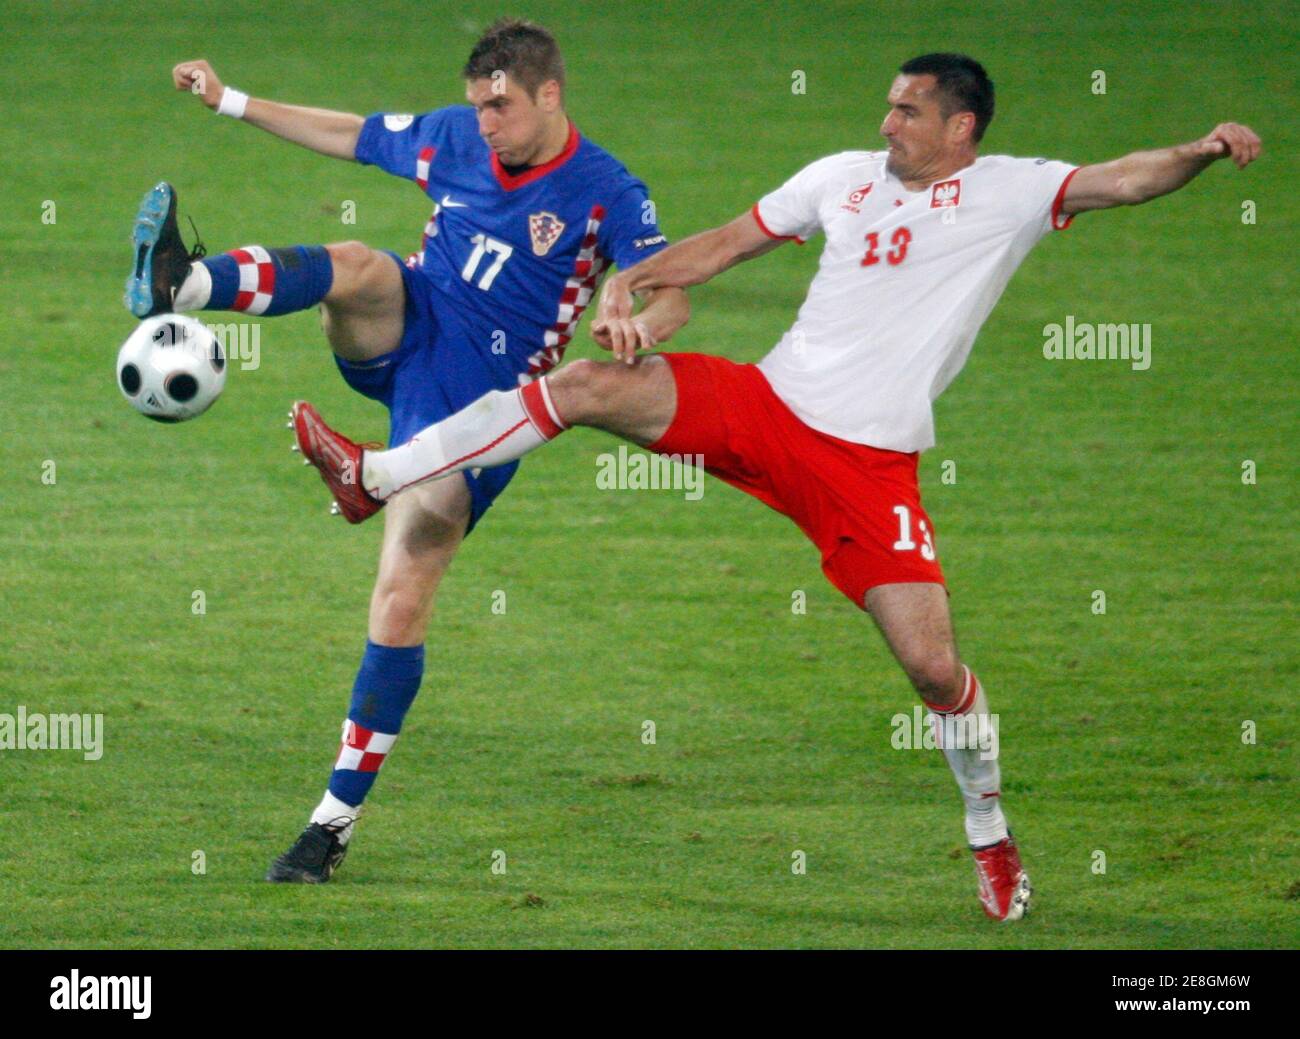 Poland's Rafal Murawski (R) challenges Croatia's Ivan Klasnic during their Group B Euro 2008 soccer match at the Woerthersee Stadium in Klagenfurt, June 16, 2008.  REUTERS/Miro Kuzmnovic (AUSTRIA)   MOBILE OUT. EDITORIAL USE ONLY Stock Photo